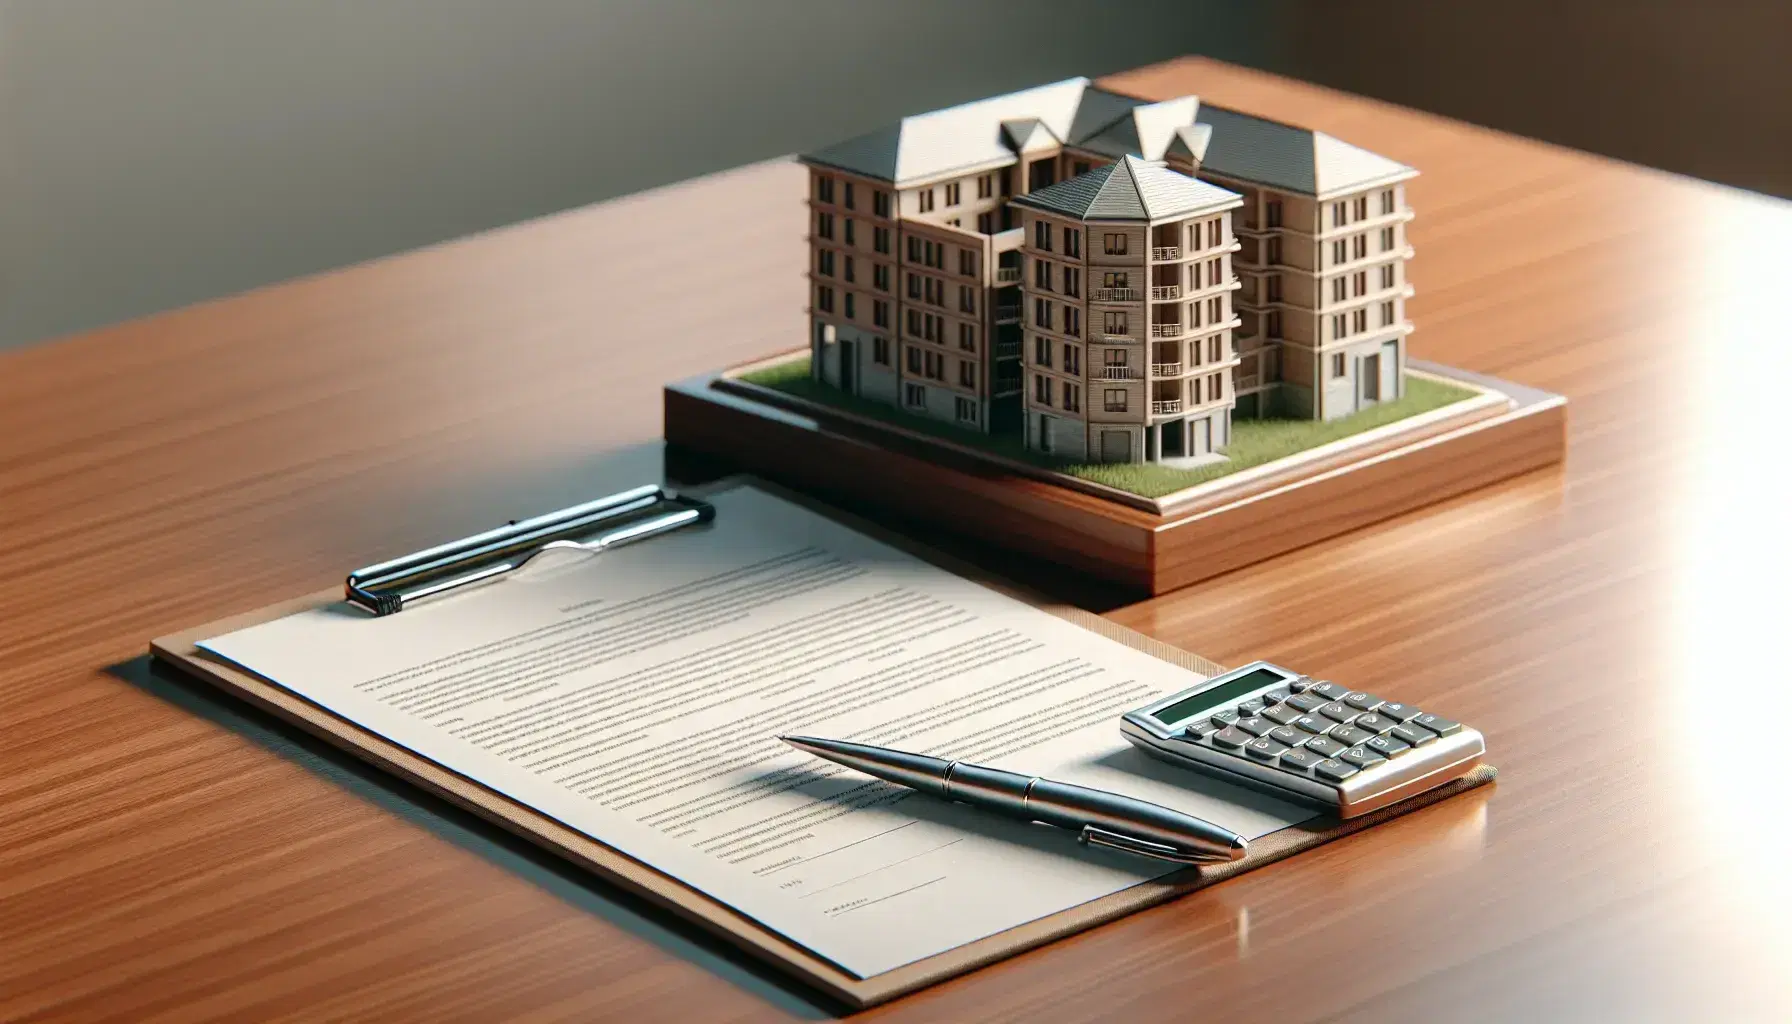 Polished wooden table with open blank lease agreement, silver pen, calculator, and scale model of residential building by a window with city view.